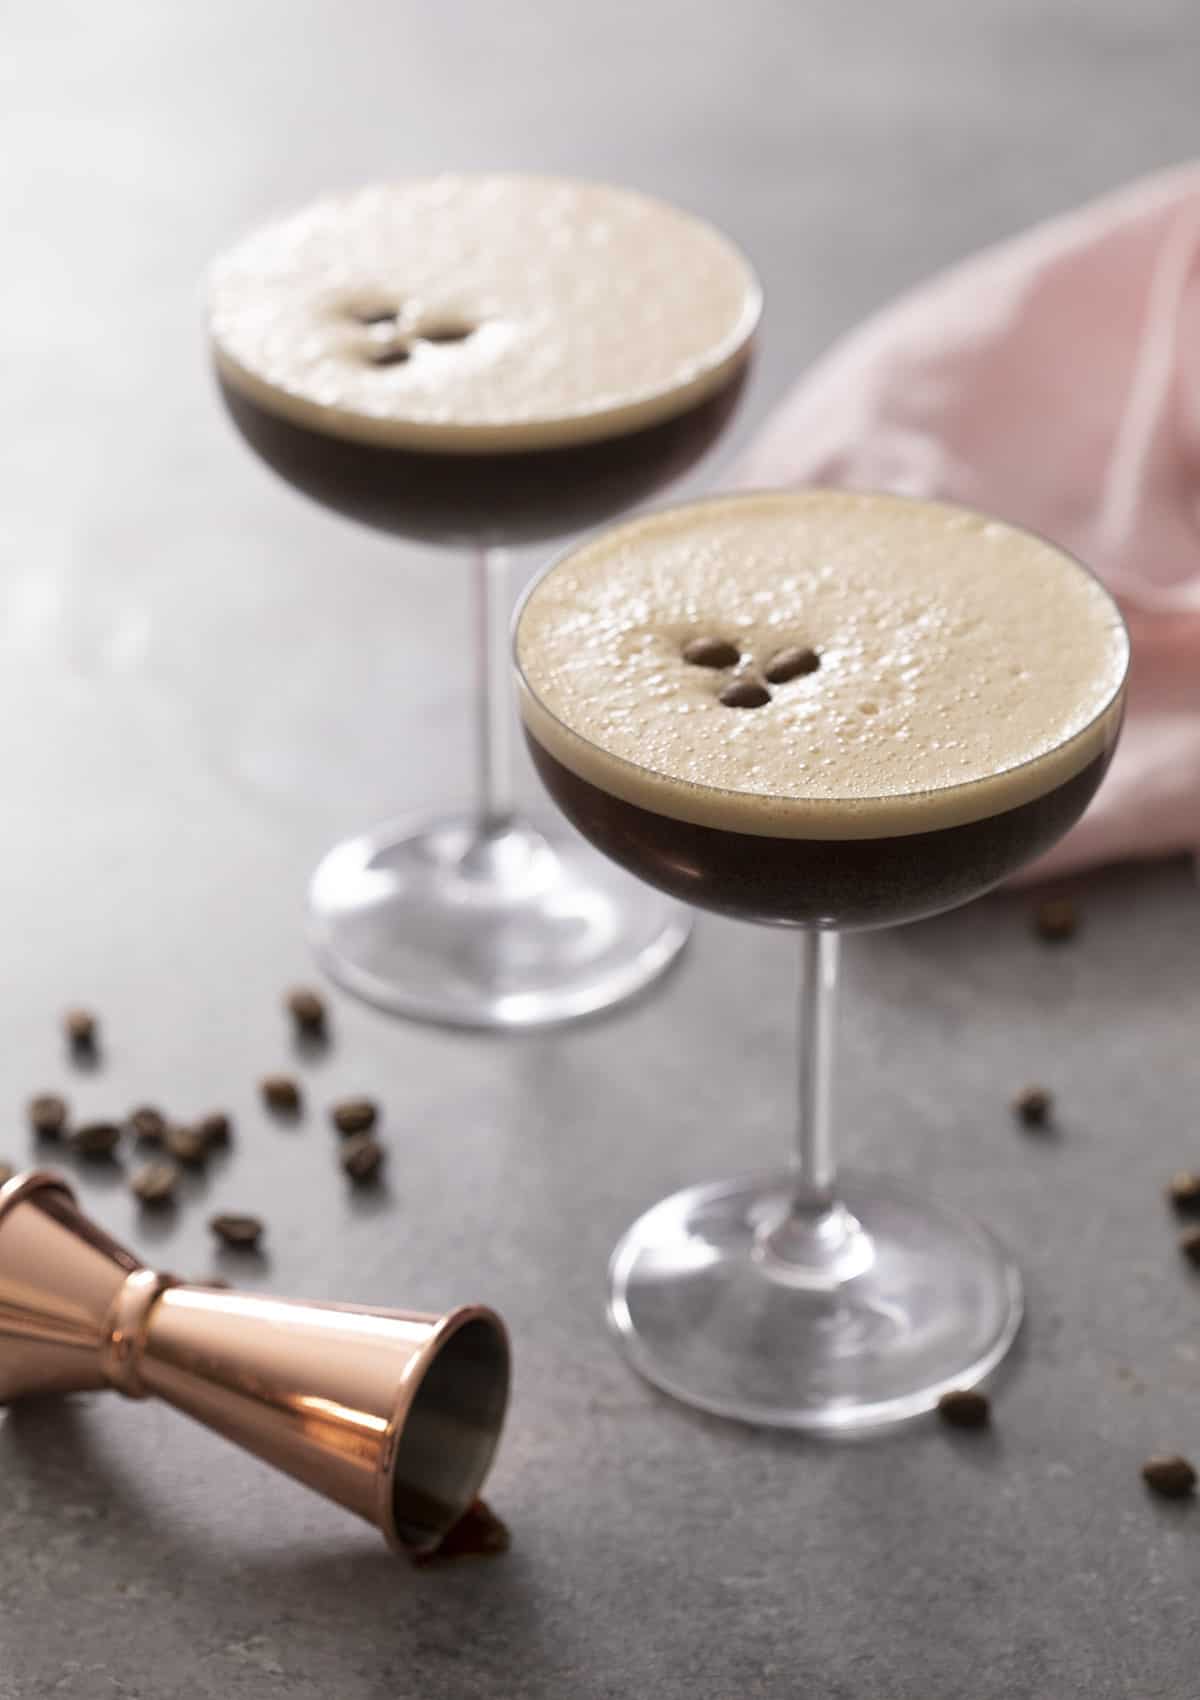 An Espresso martini on a gray surface with coffee beans scattered around